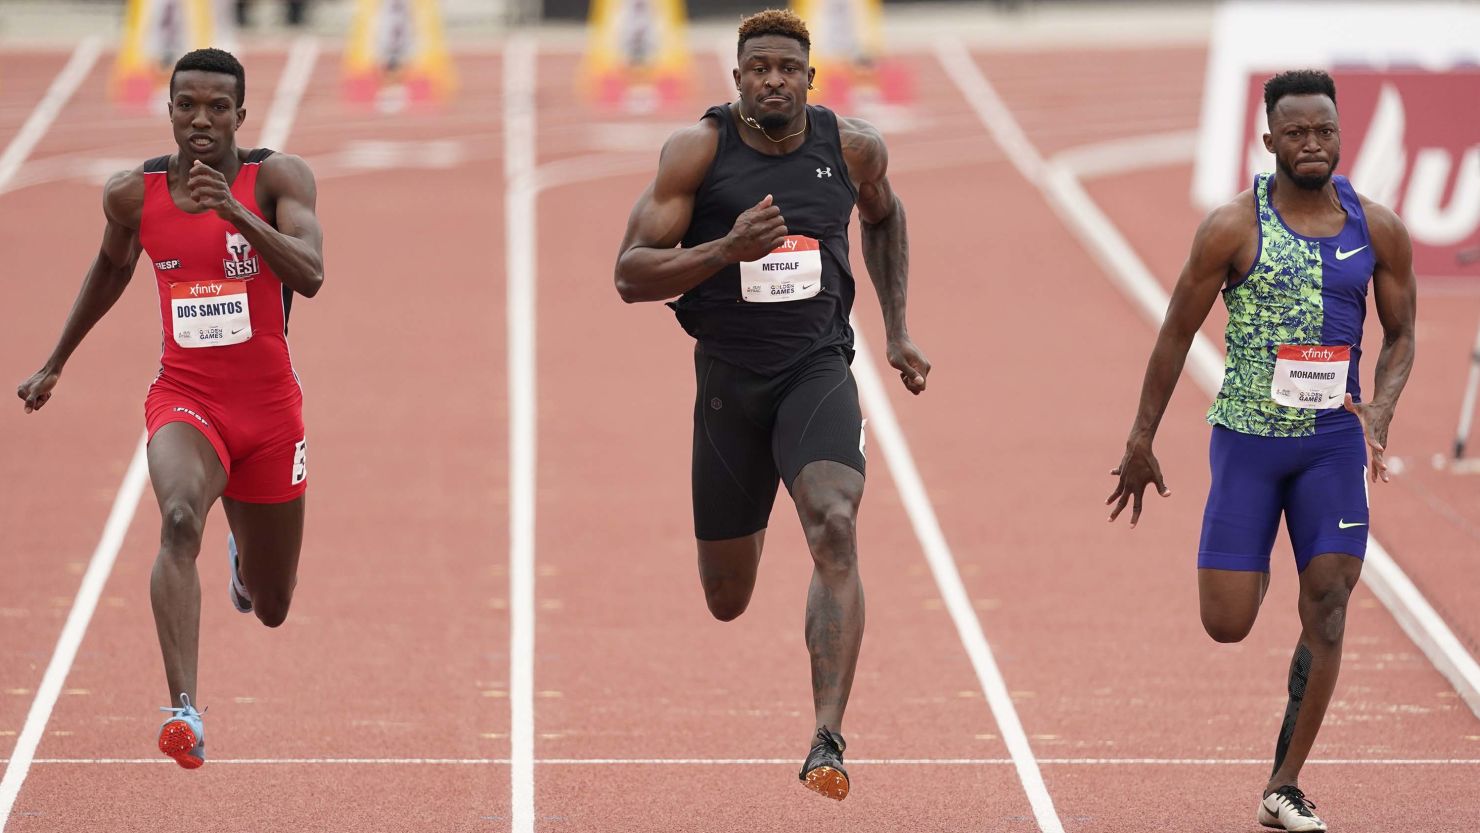 Seattle Seahawks wide receiver DK Metcalf competes in the second heat of the men's 100-meter race.